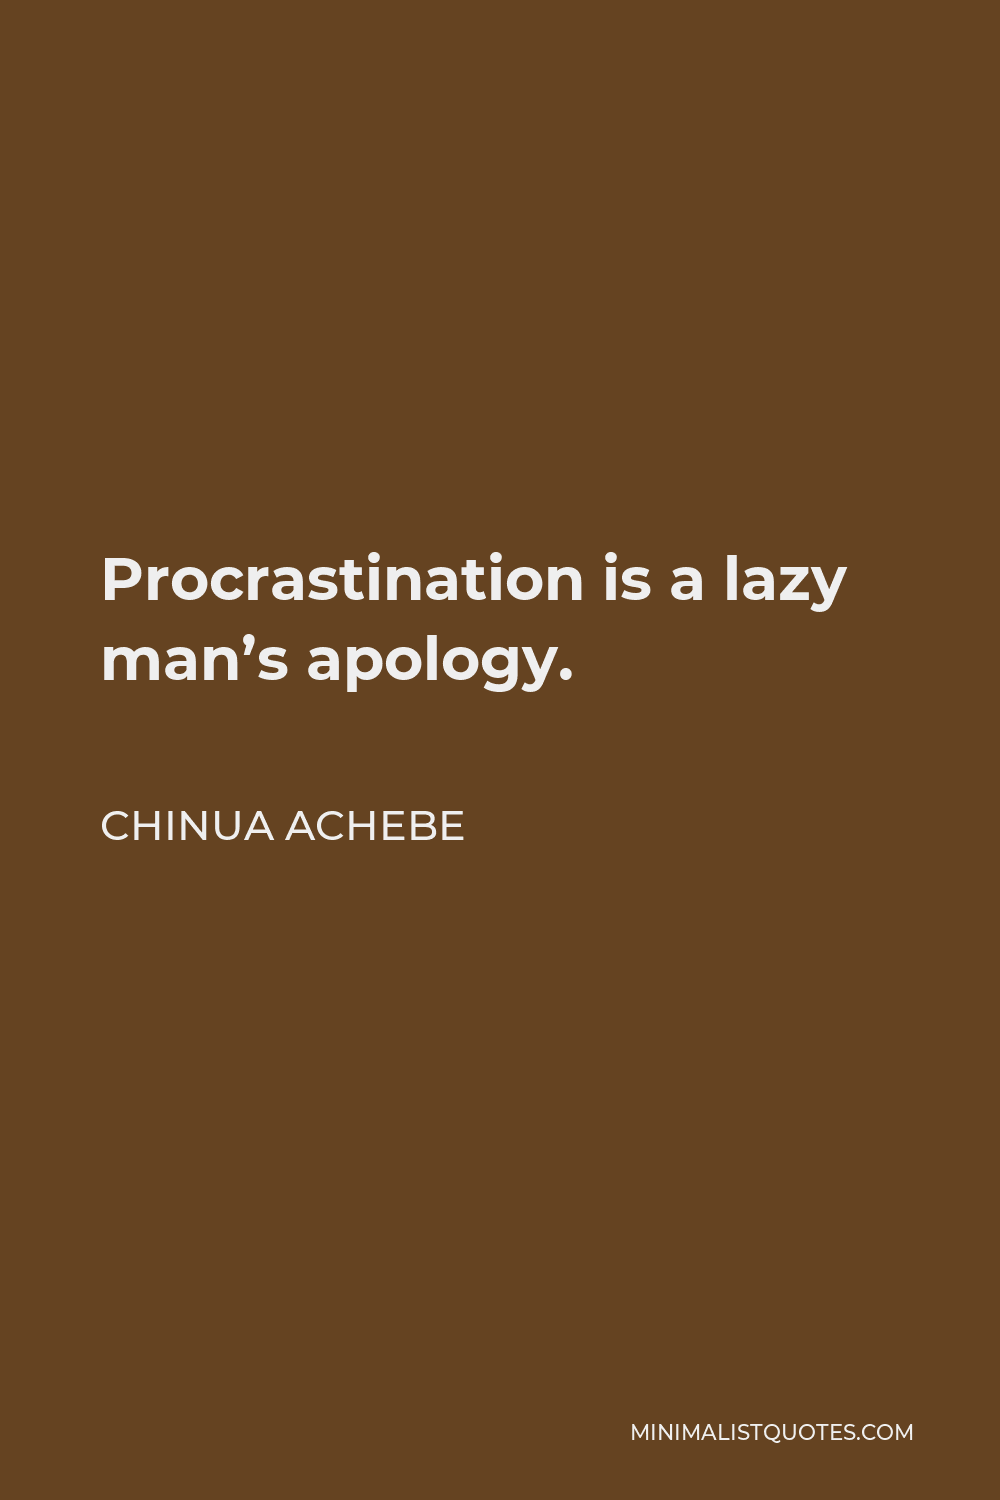 Chinua Achebe Quote - Procrastination is a lazy man’s apology.